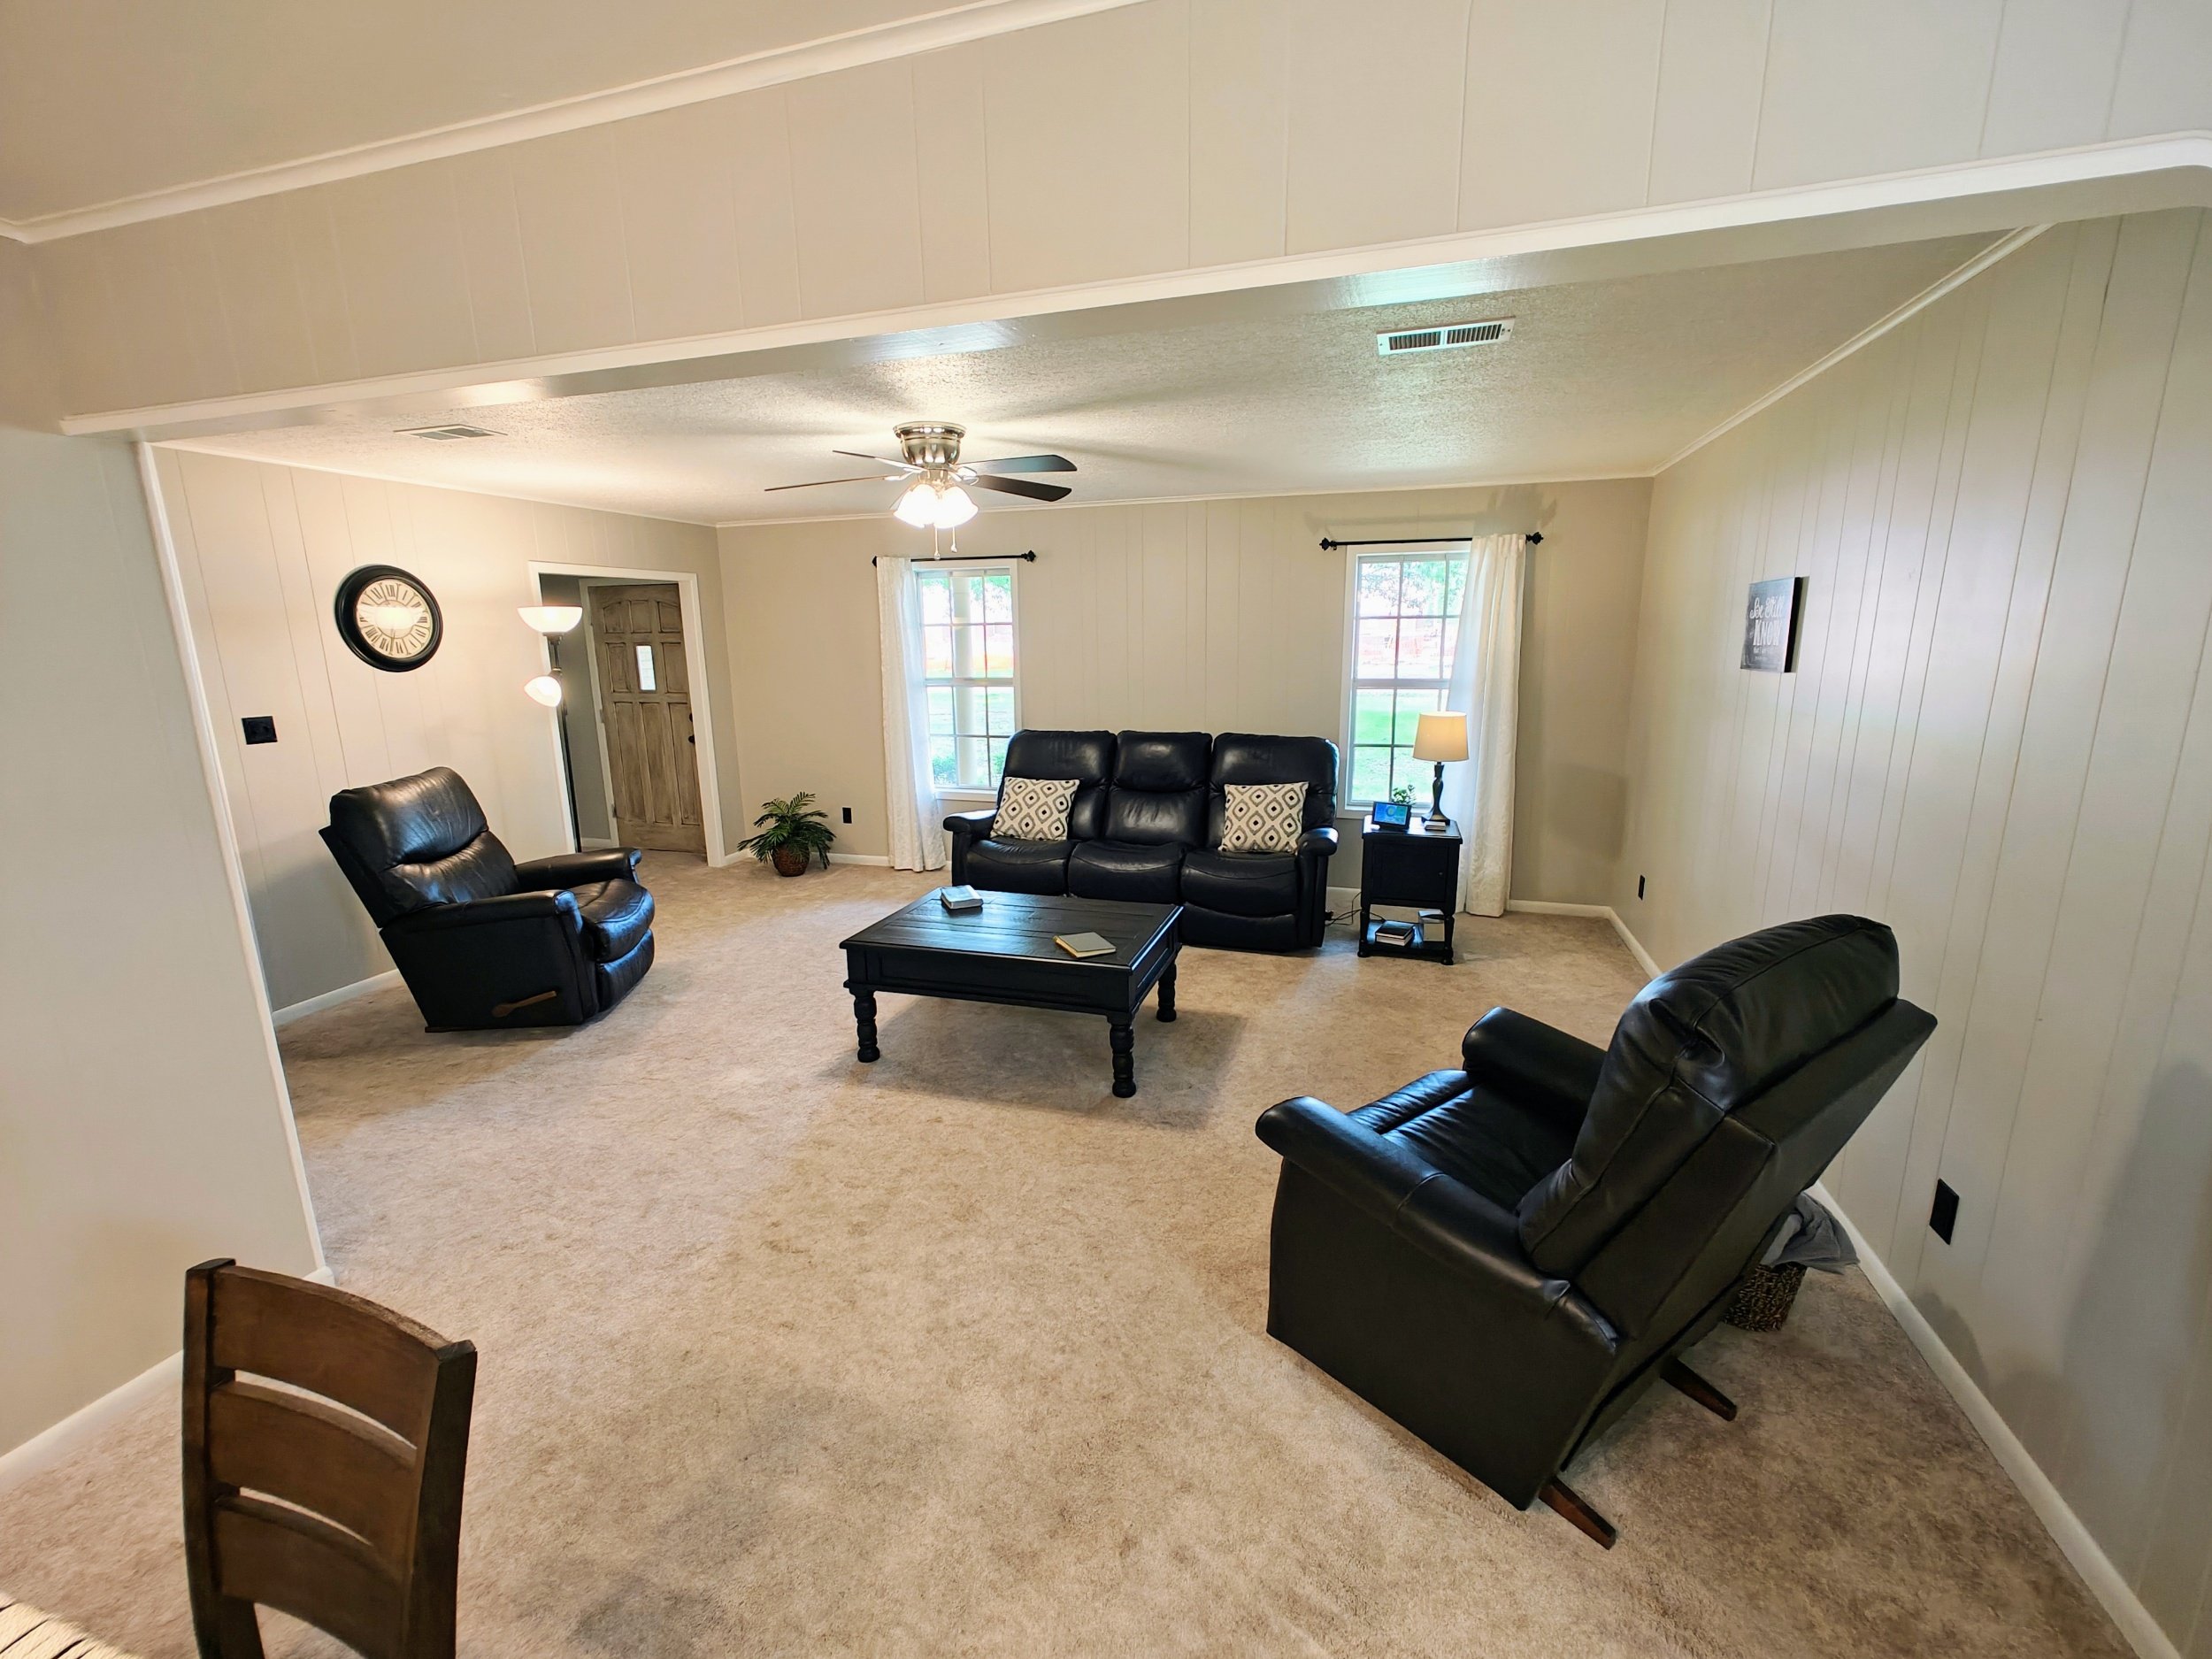 Large, carpeted family room